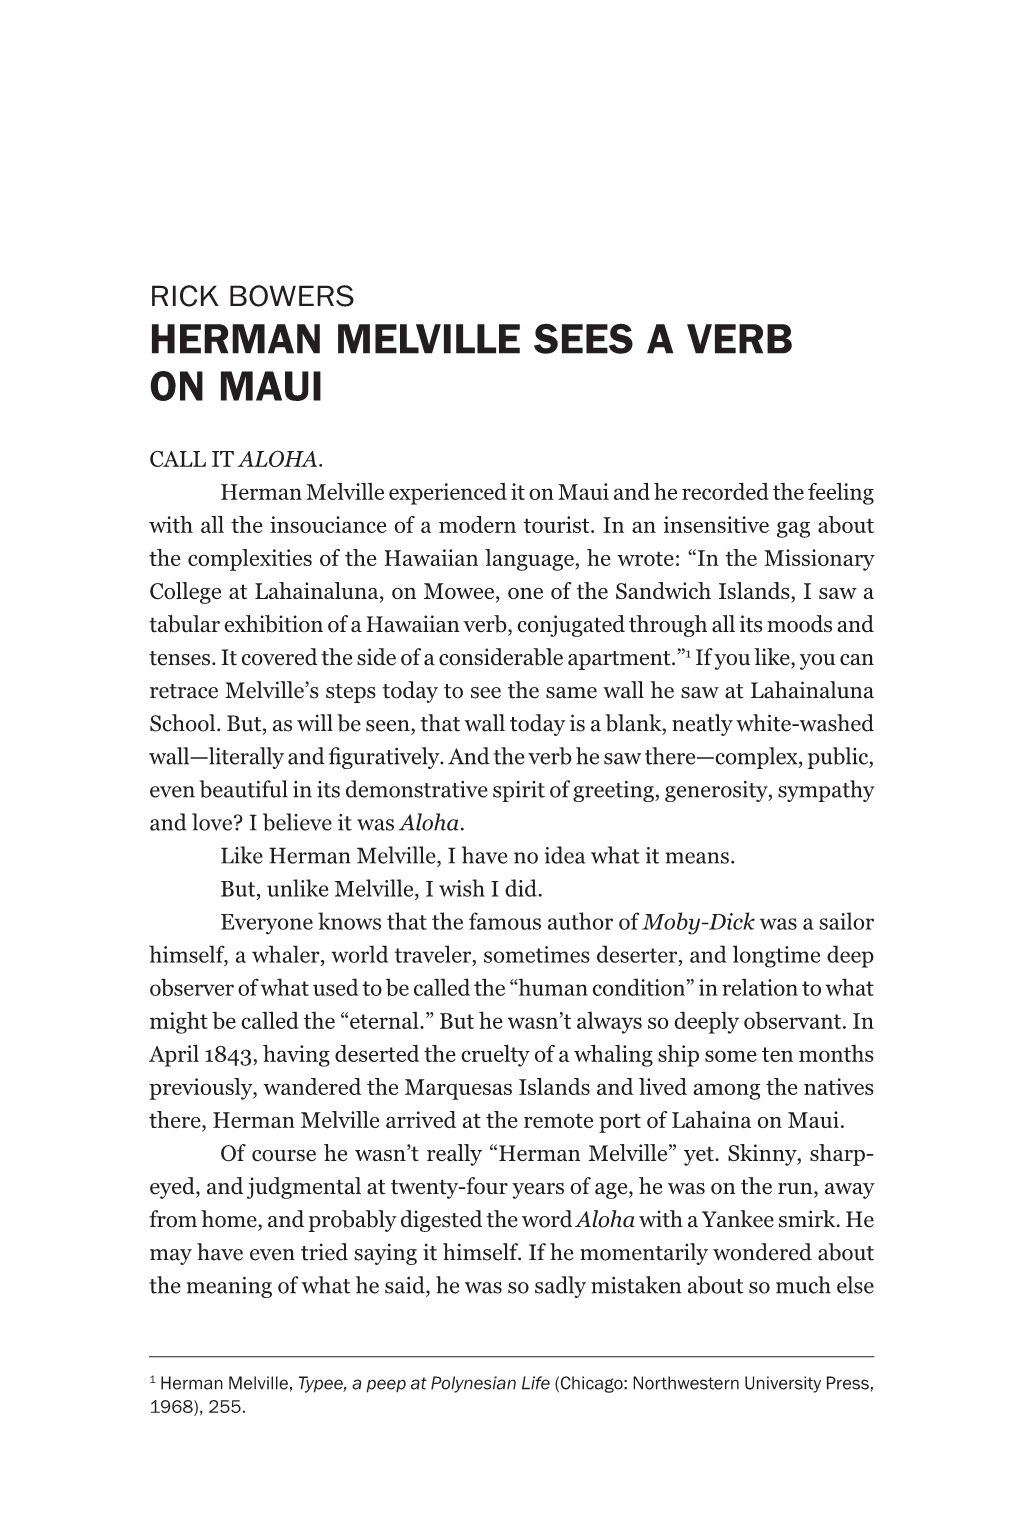 Herman Melville Sees a Verb on Maui